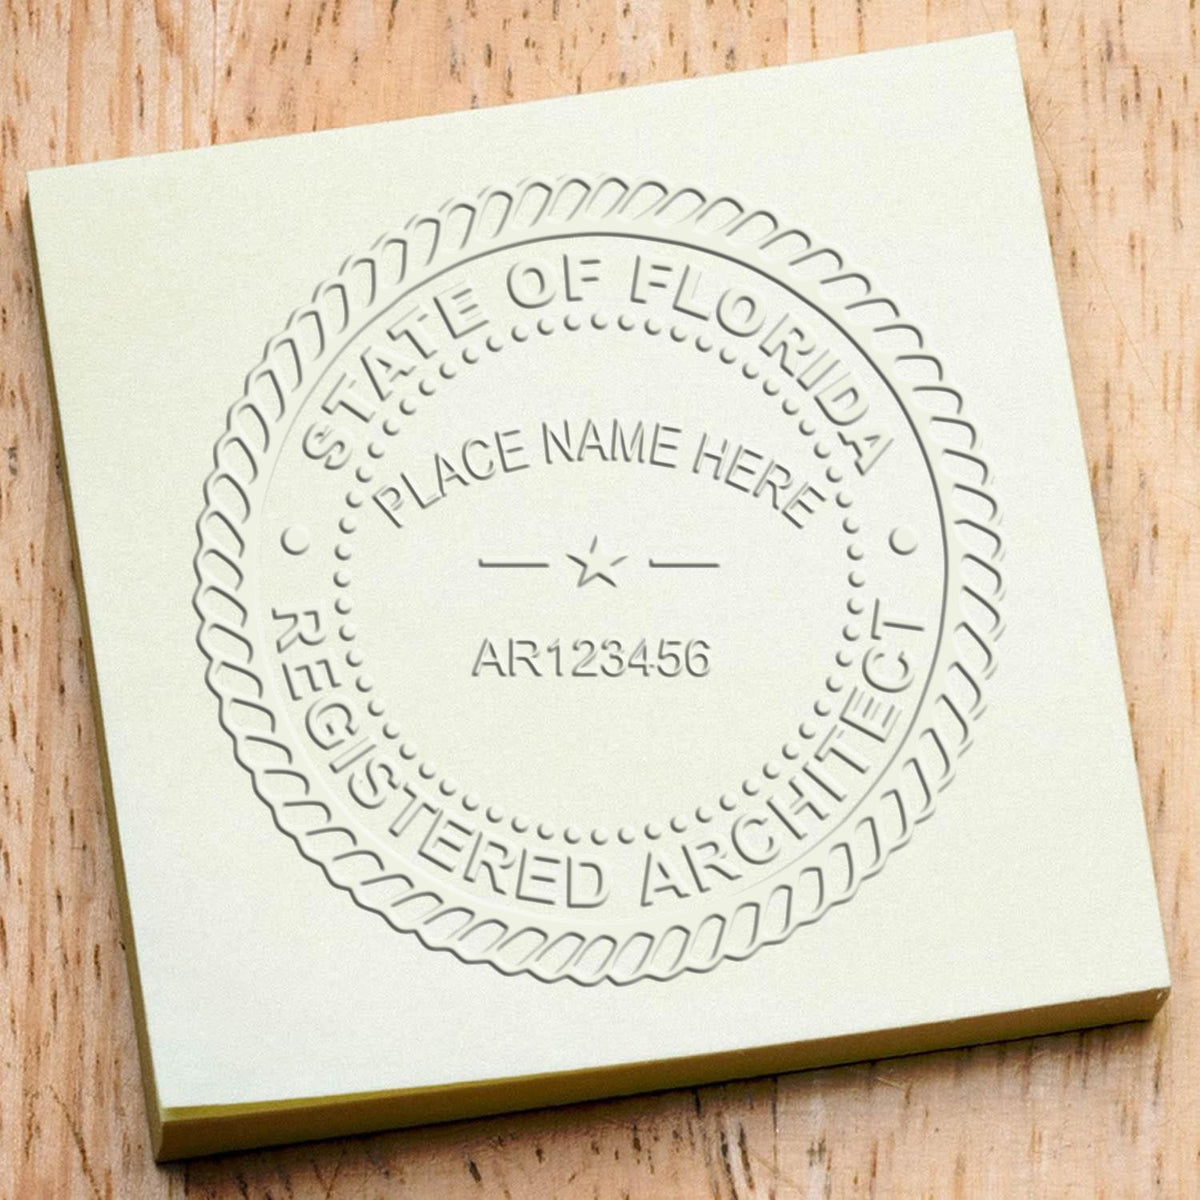 The State of Florida Long Reach Architectural Embossing Seal stamp impression comes to life with a crisp, detailed photo on paper - showcasing true professional quality.